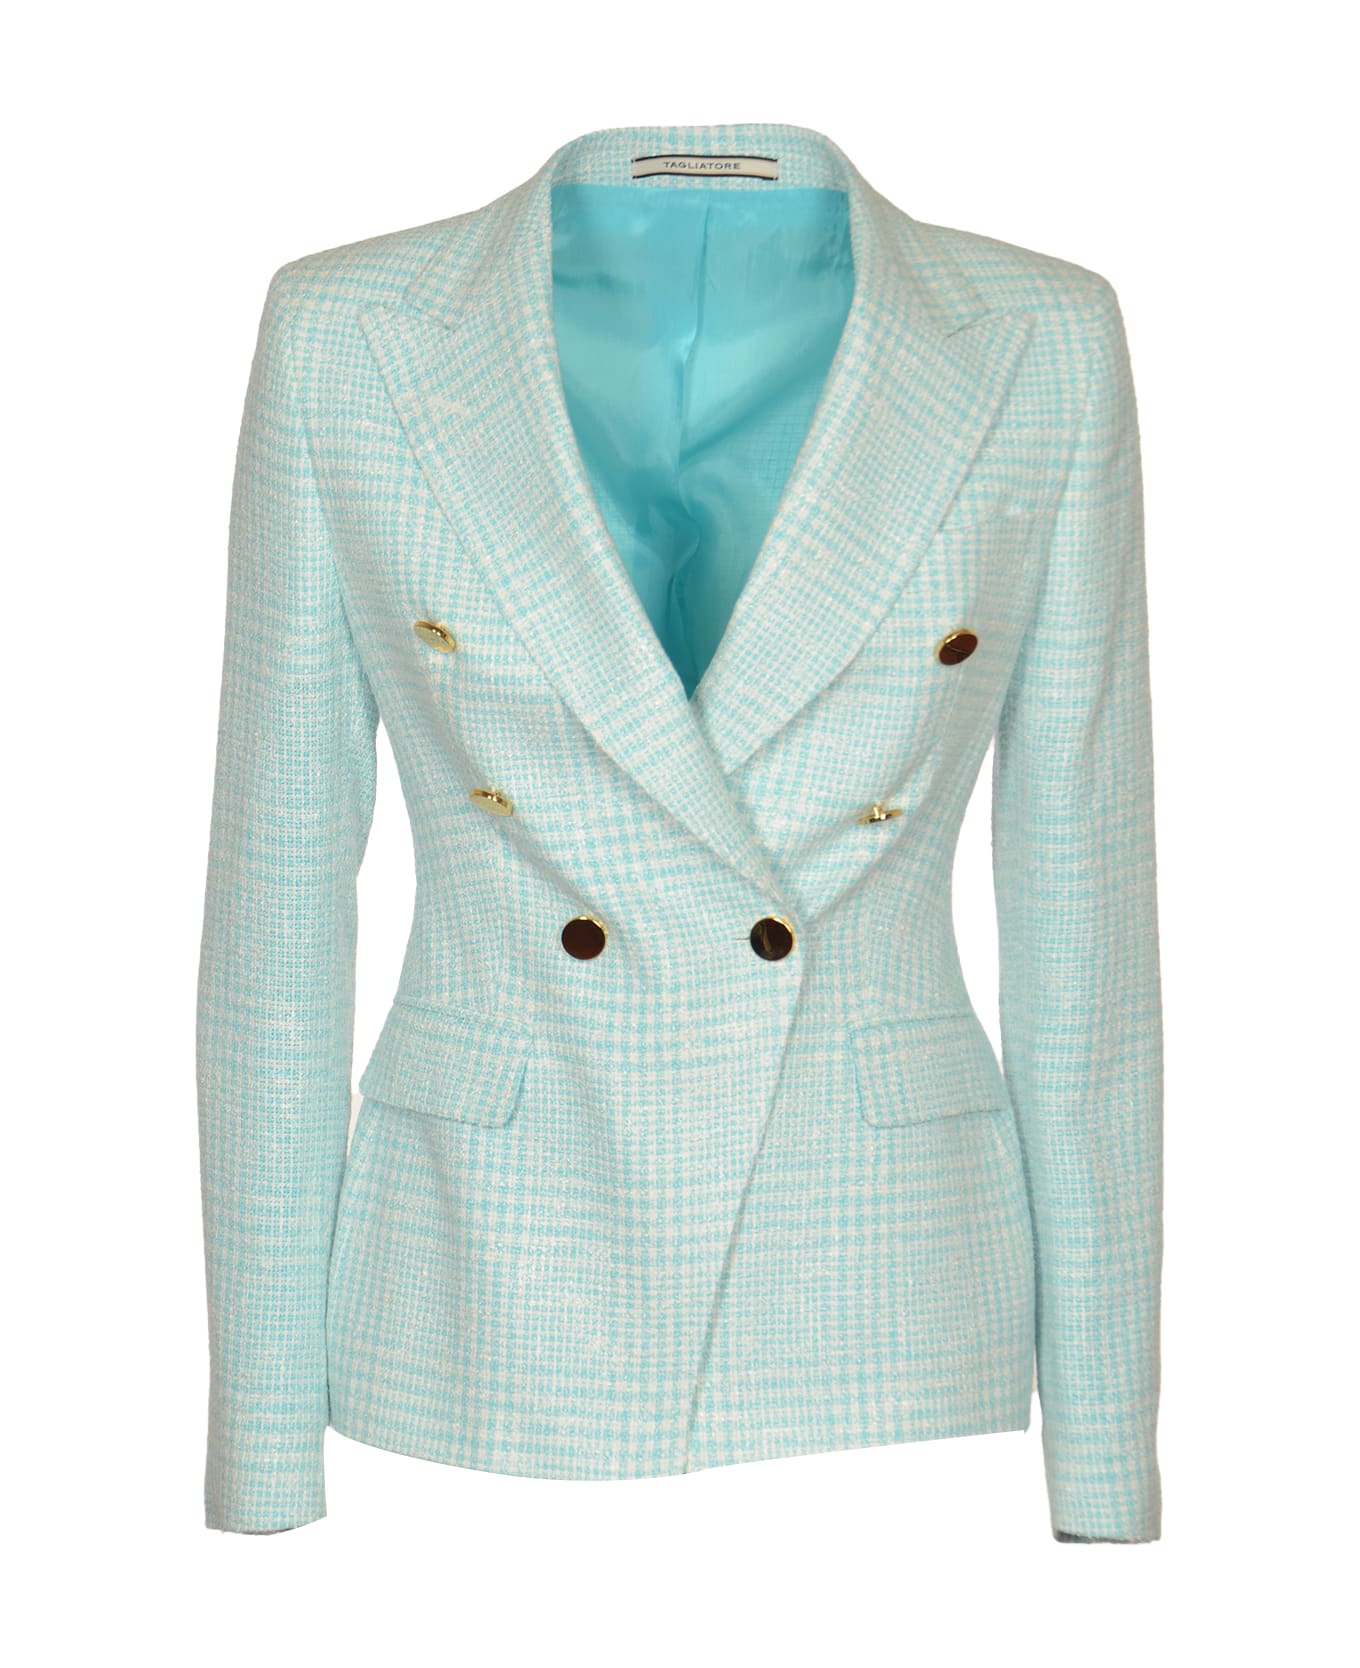 Tagliatore Light Blue Double-breasted Jacket - Light Blue ブレザー